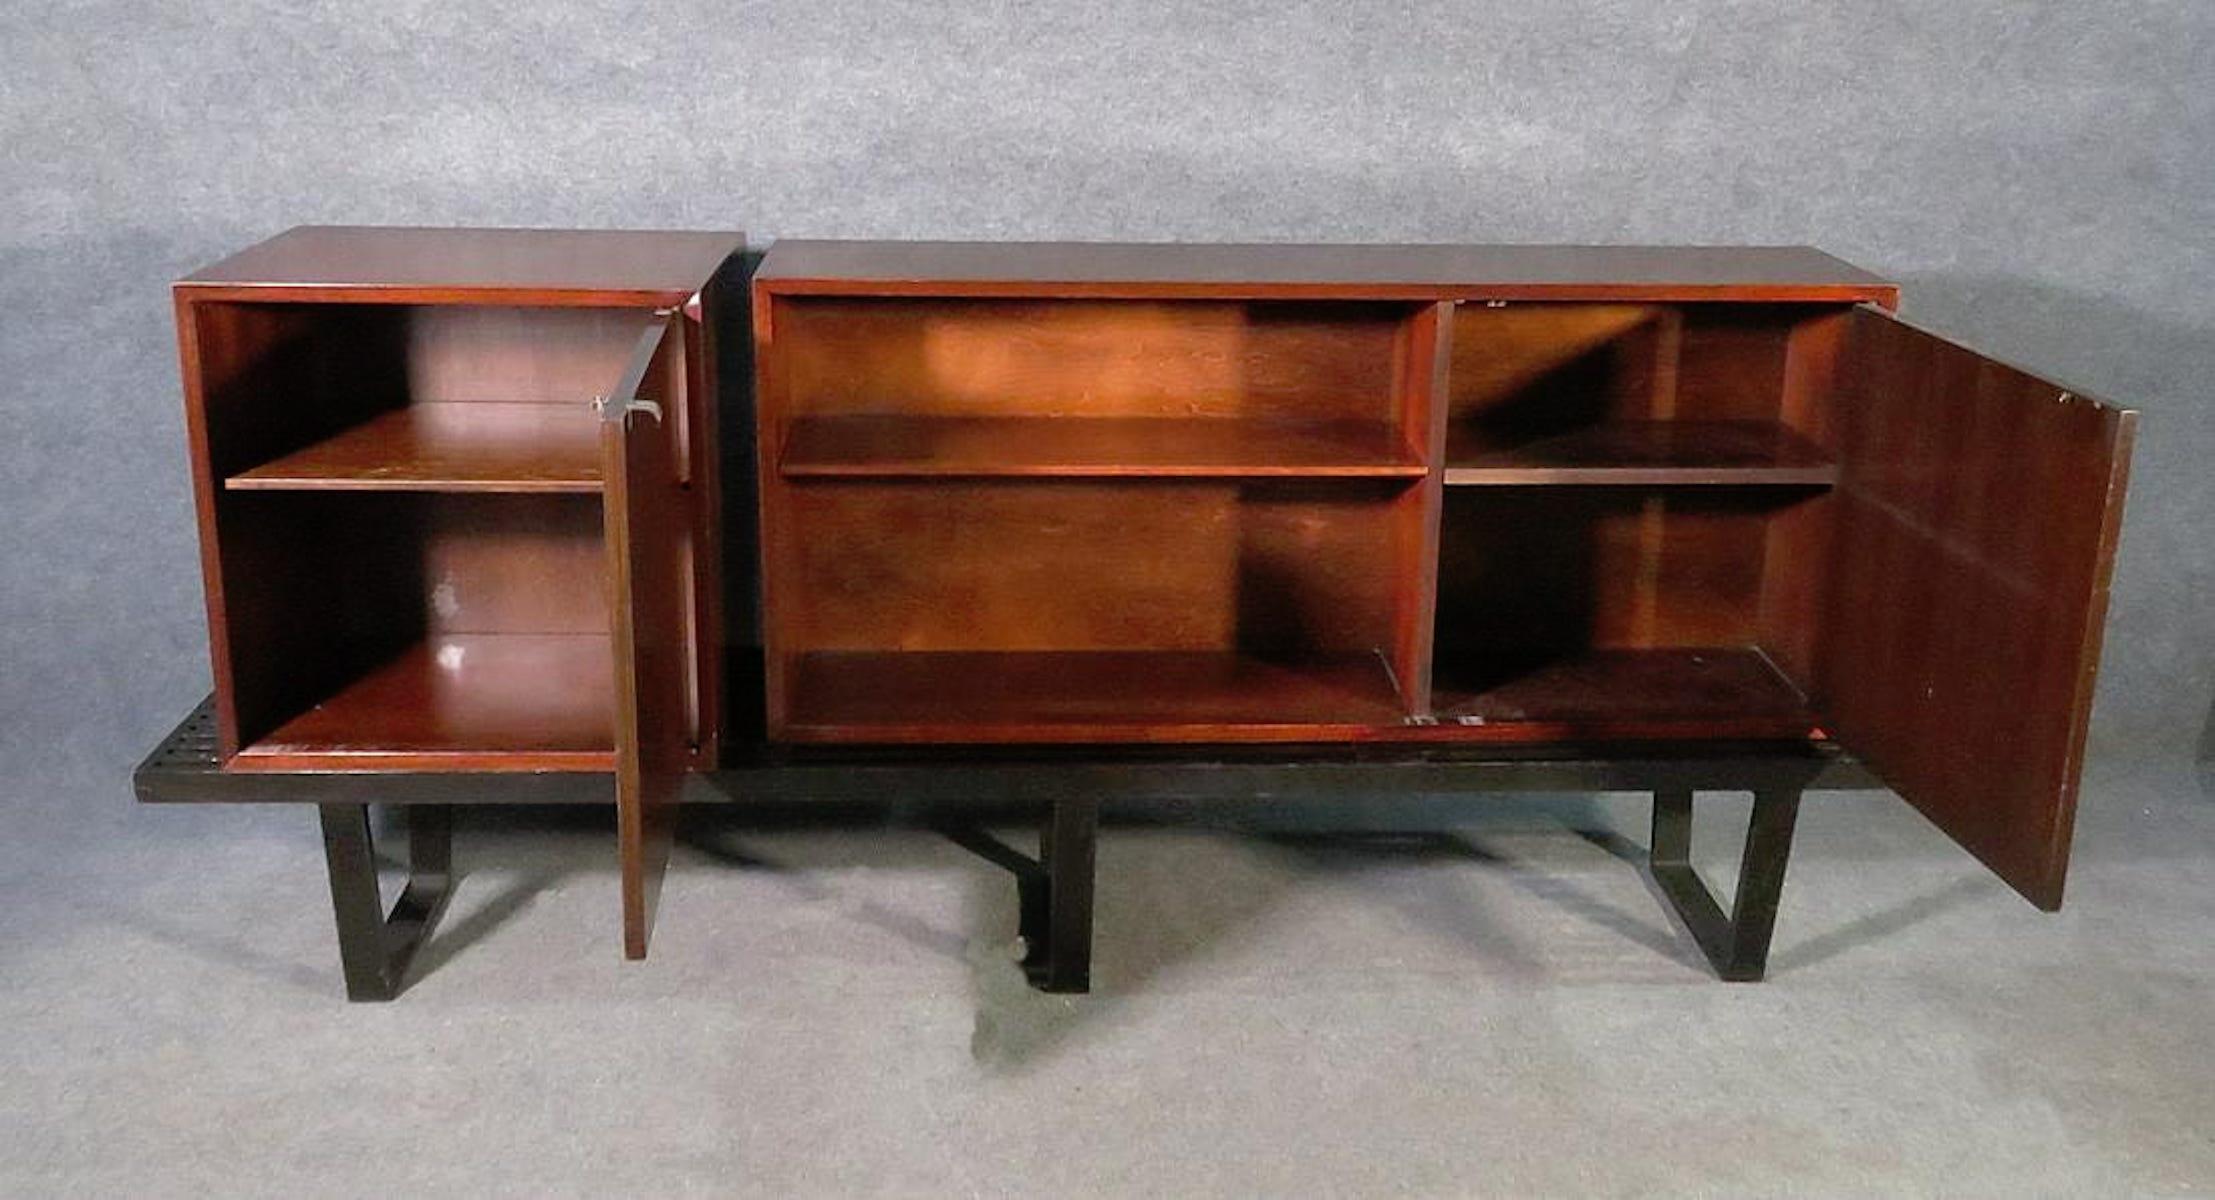 Mid-Century Modern cabinet set on slat bench by George Nelson for Herman Miller.
(Please confirm item location - NY or NJ - with dealer).
 